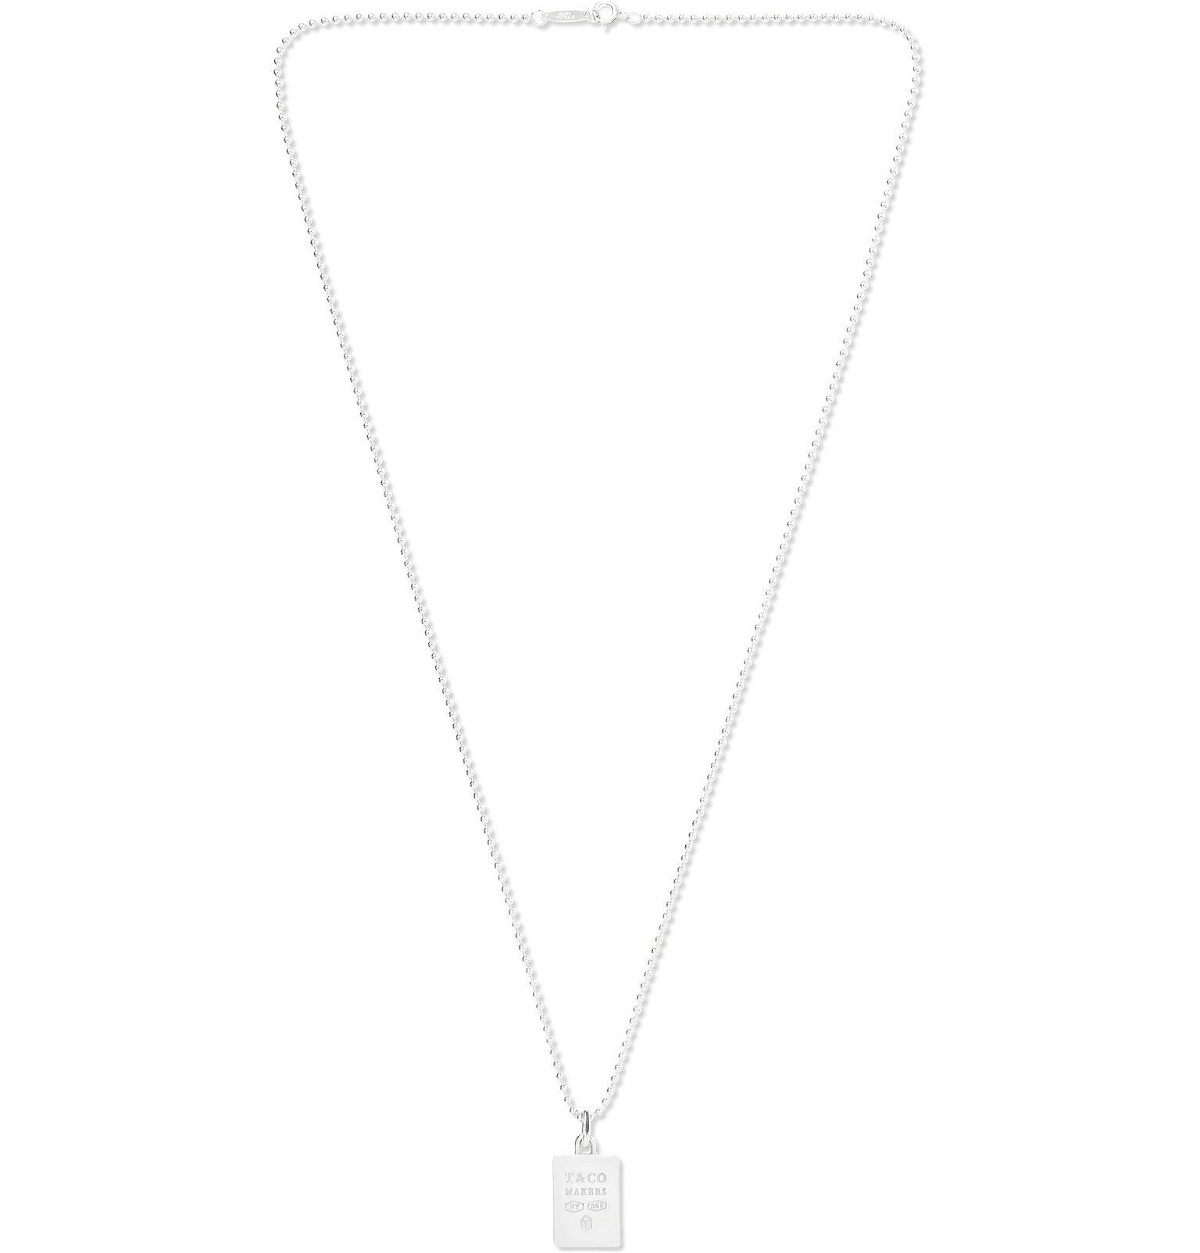 Tiffany & Co. - Tiffany 1837 Makers Sterling Silver Necklace - Silver ...